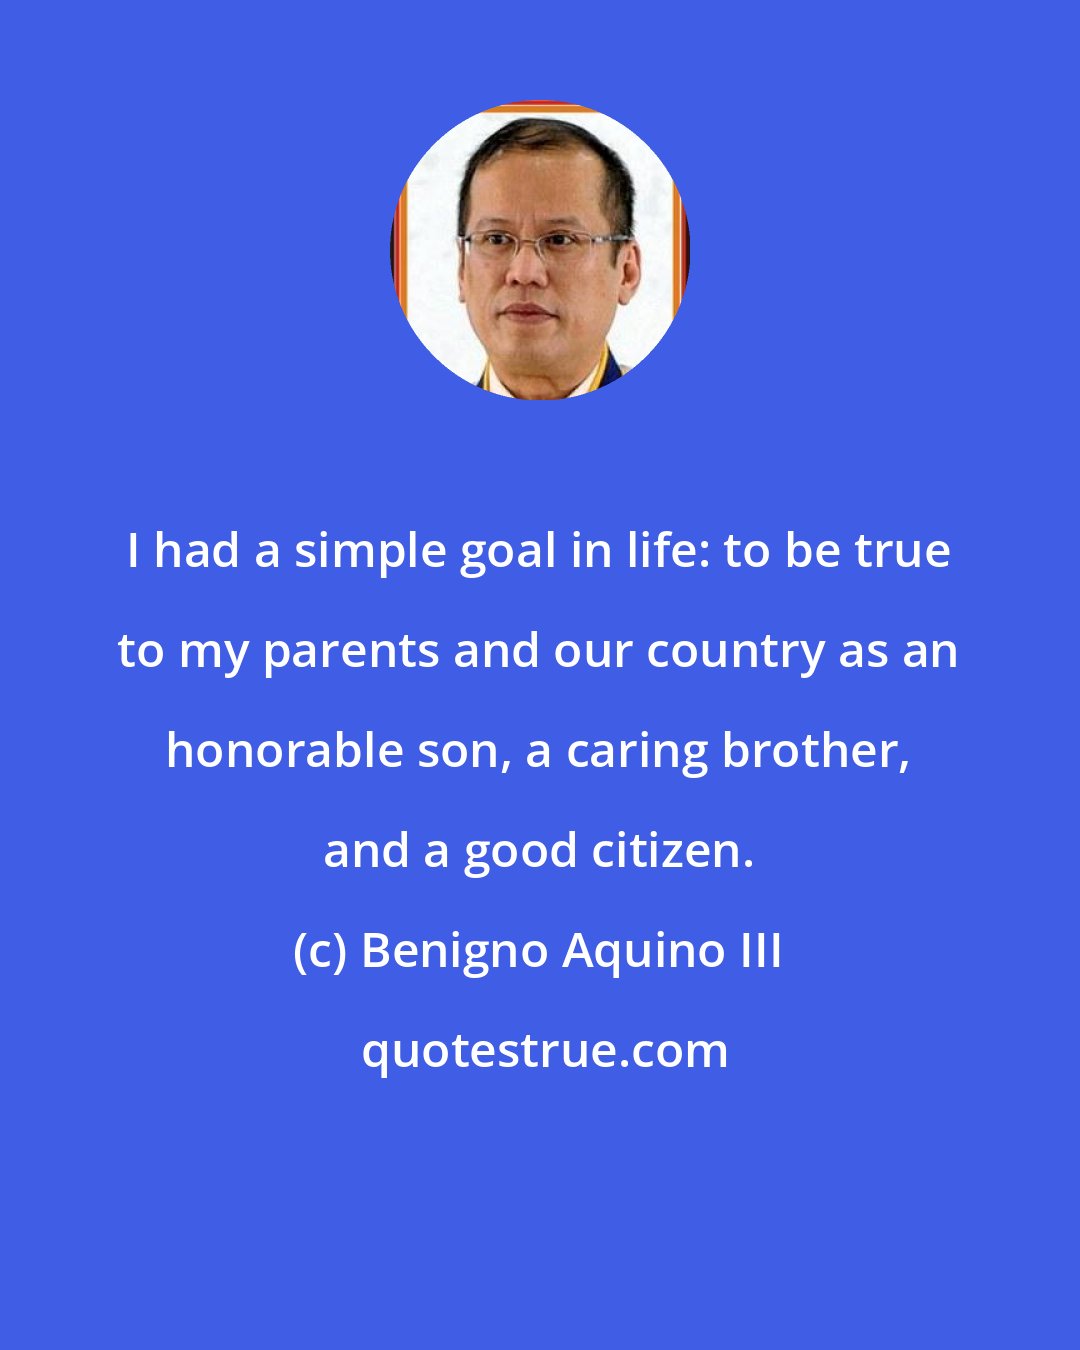 Benigno Aquino III: I had a simple goal in life: to be true to my parents and our country as an honorable son, a caring brother, and a good citizen.